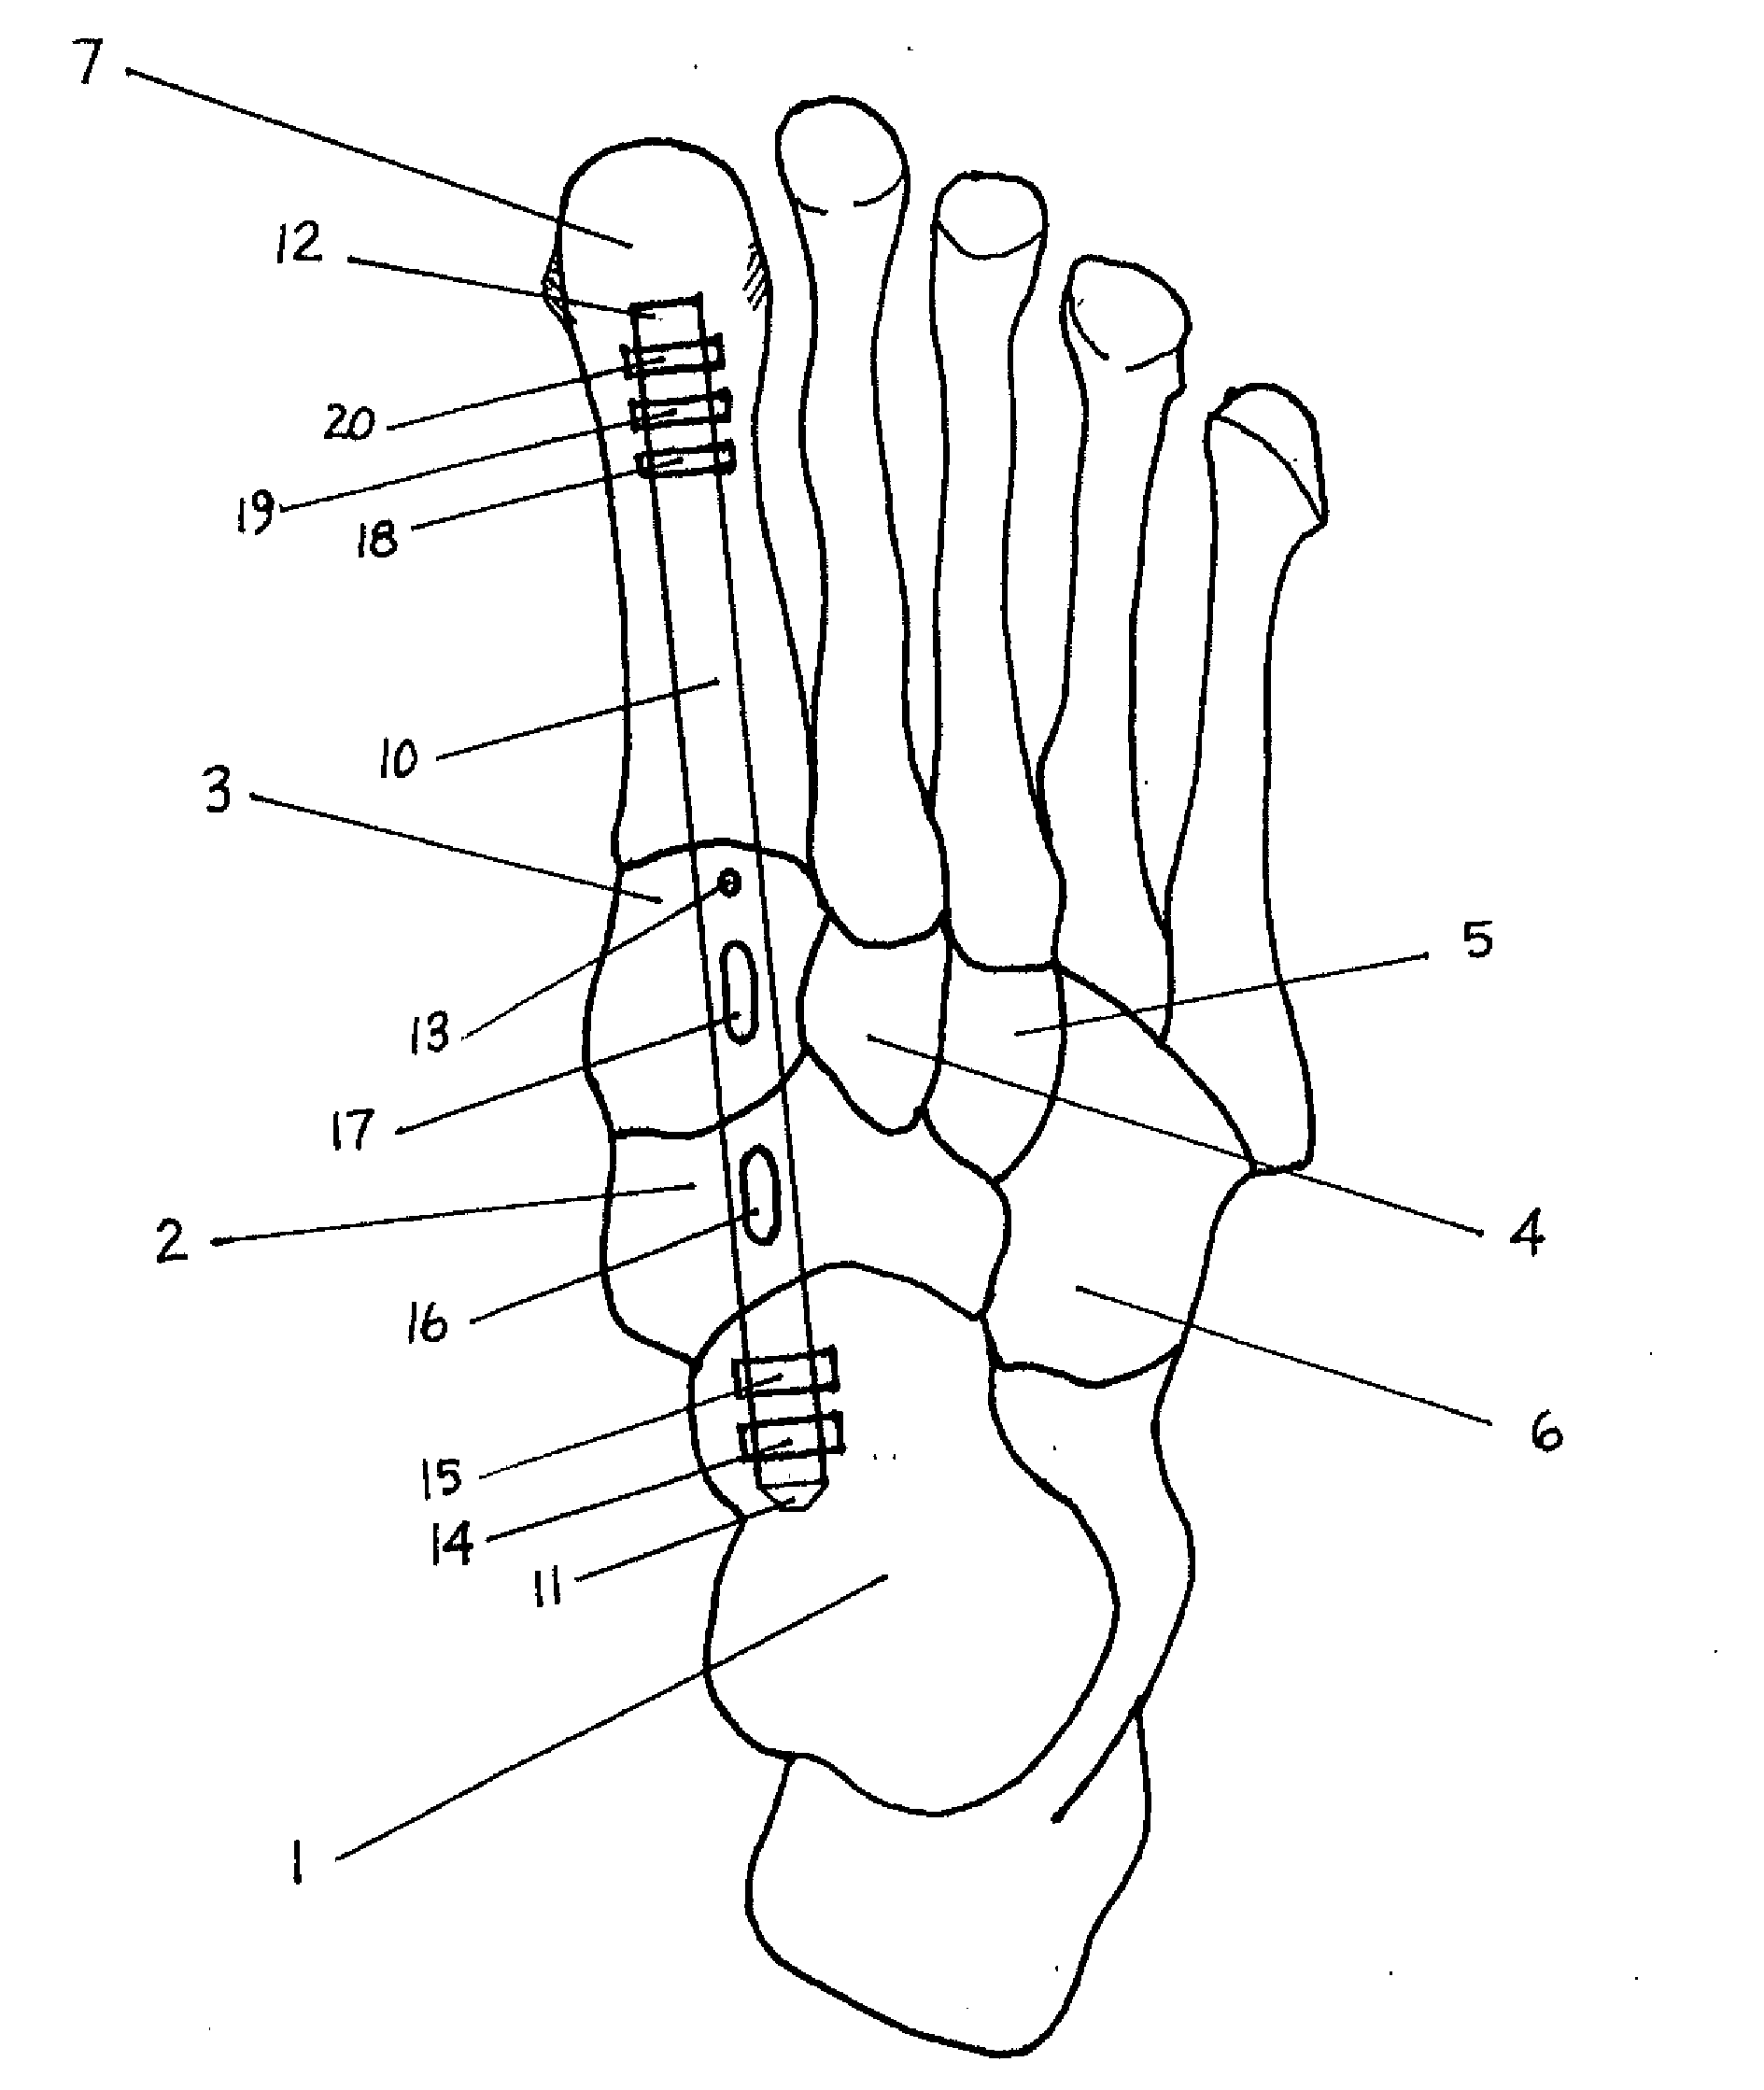 Method and Apparatus for Repairing the Mid-Foot Region Via and Intramedullary Nail